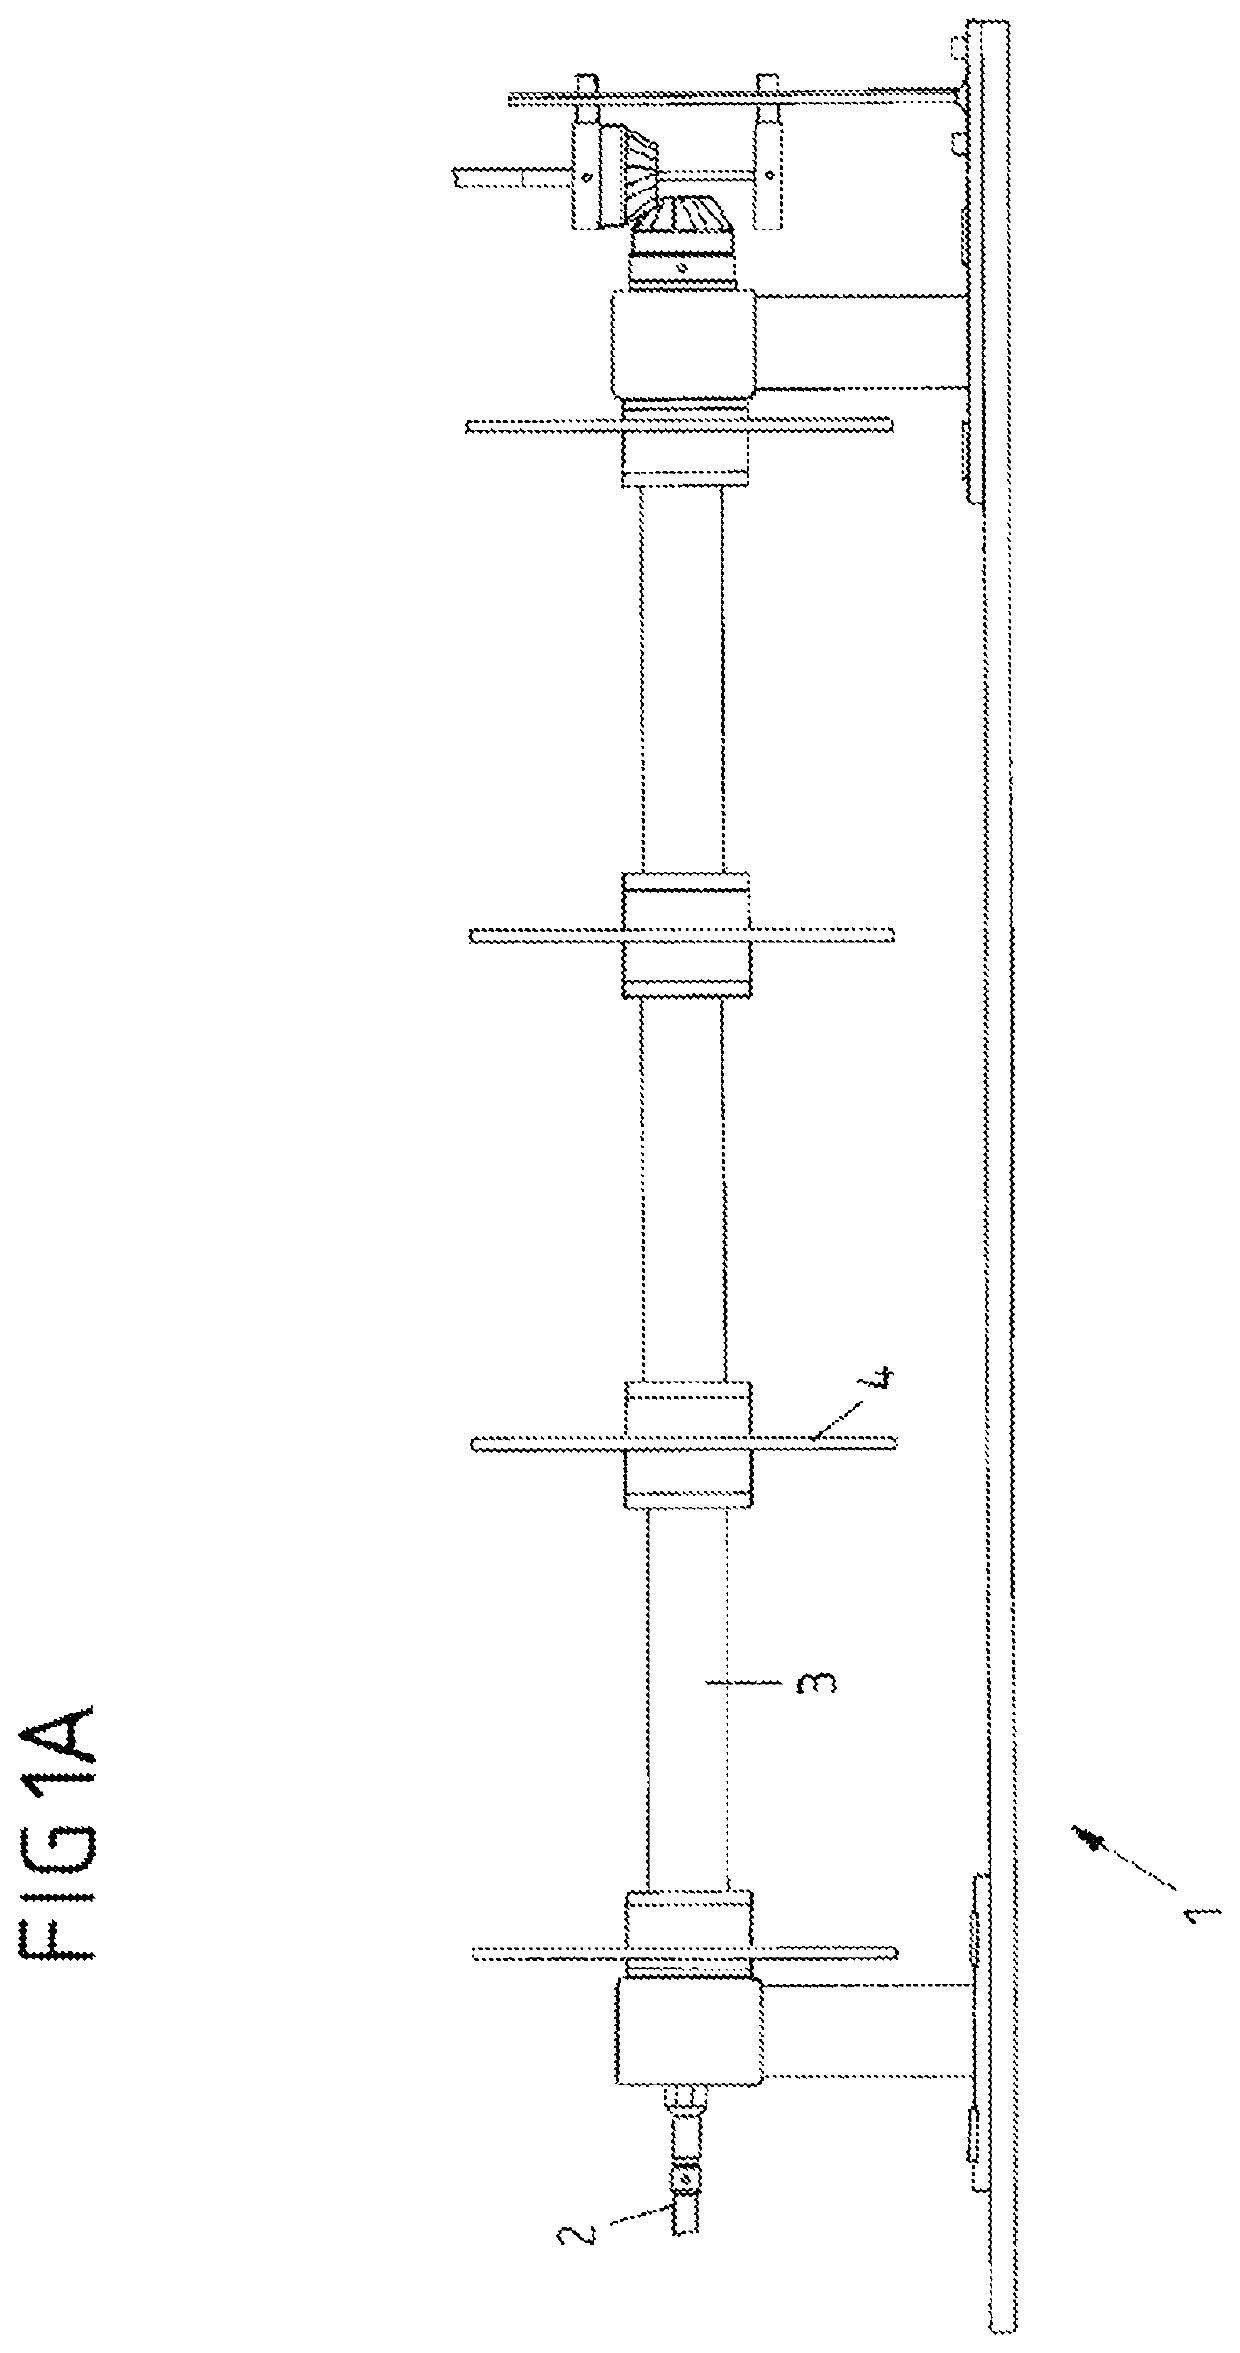 Device and method for generating gas bubbles in a liquid